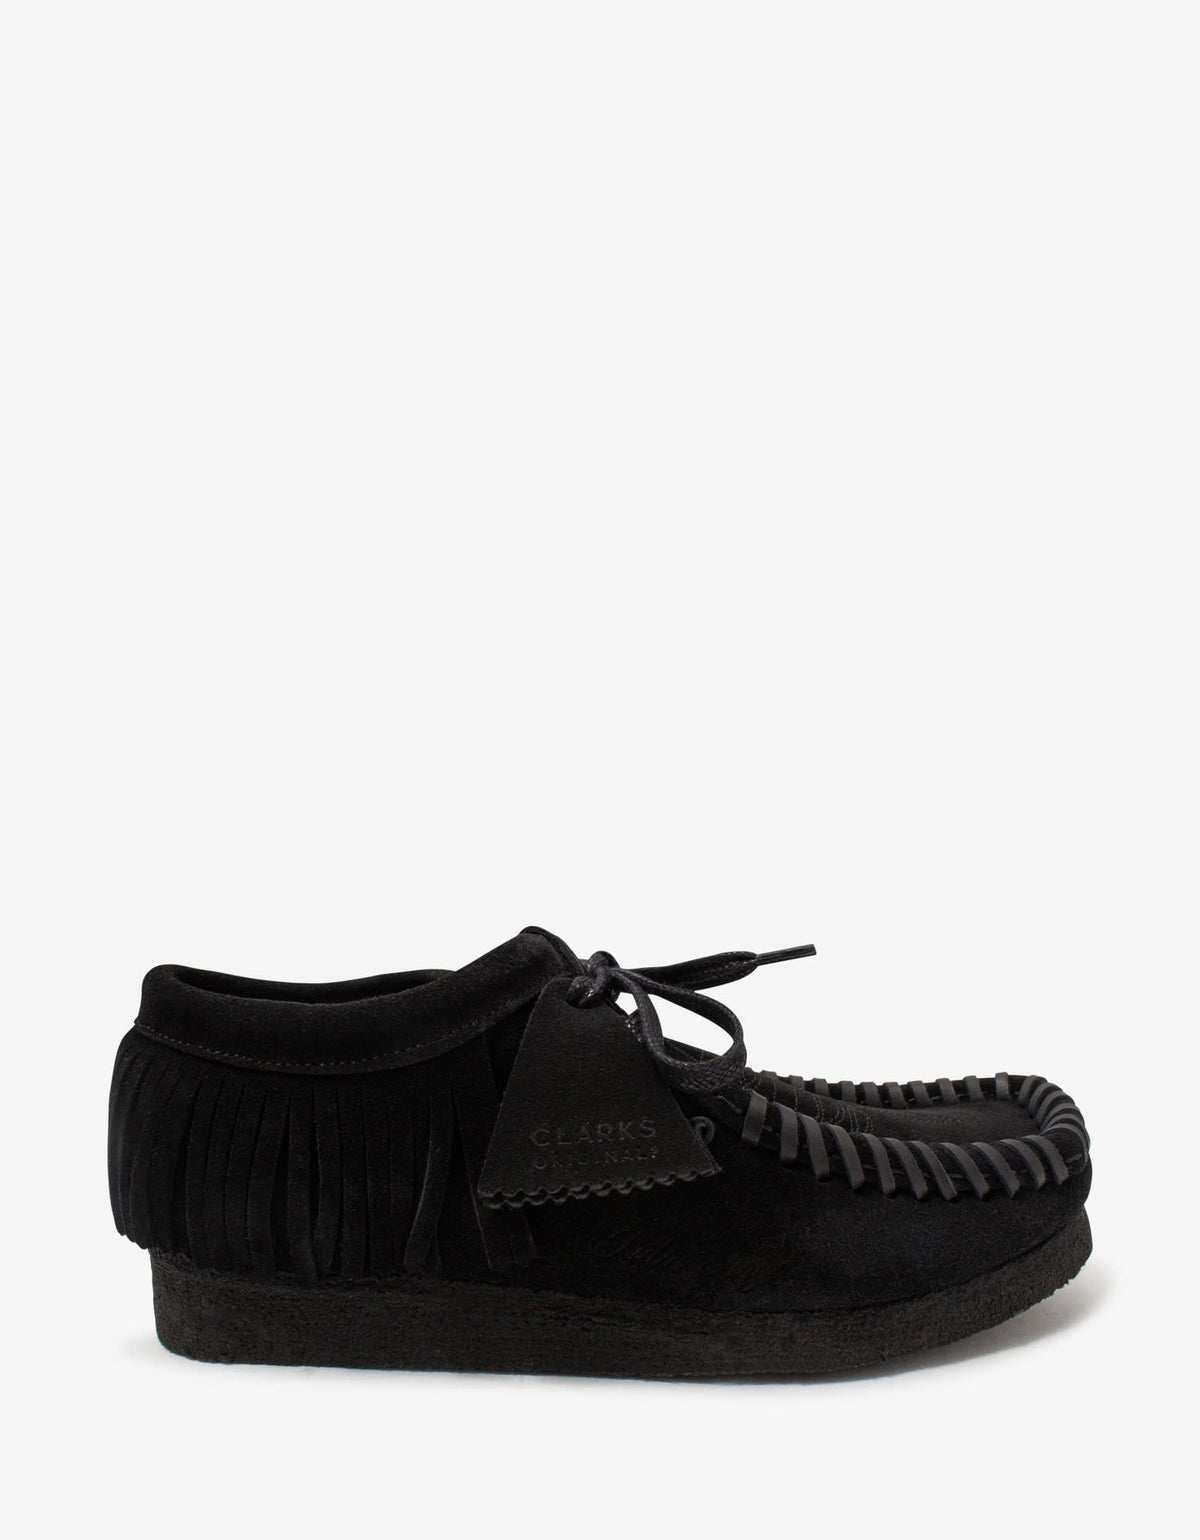 Palm Angels x Clarks Black Suede Fringed Wallabee Shoes